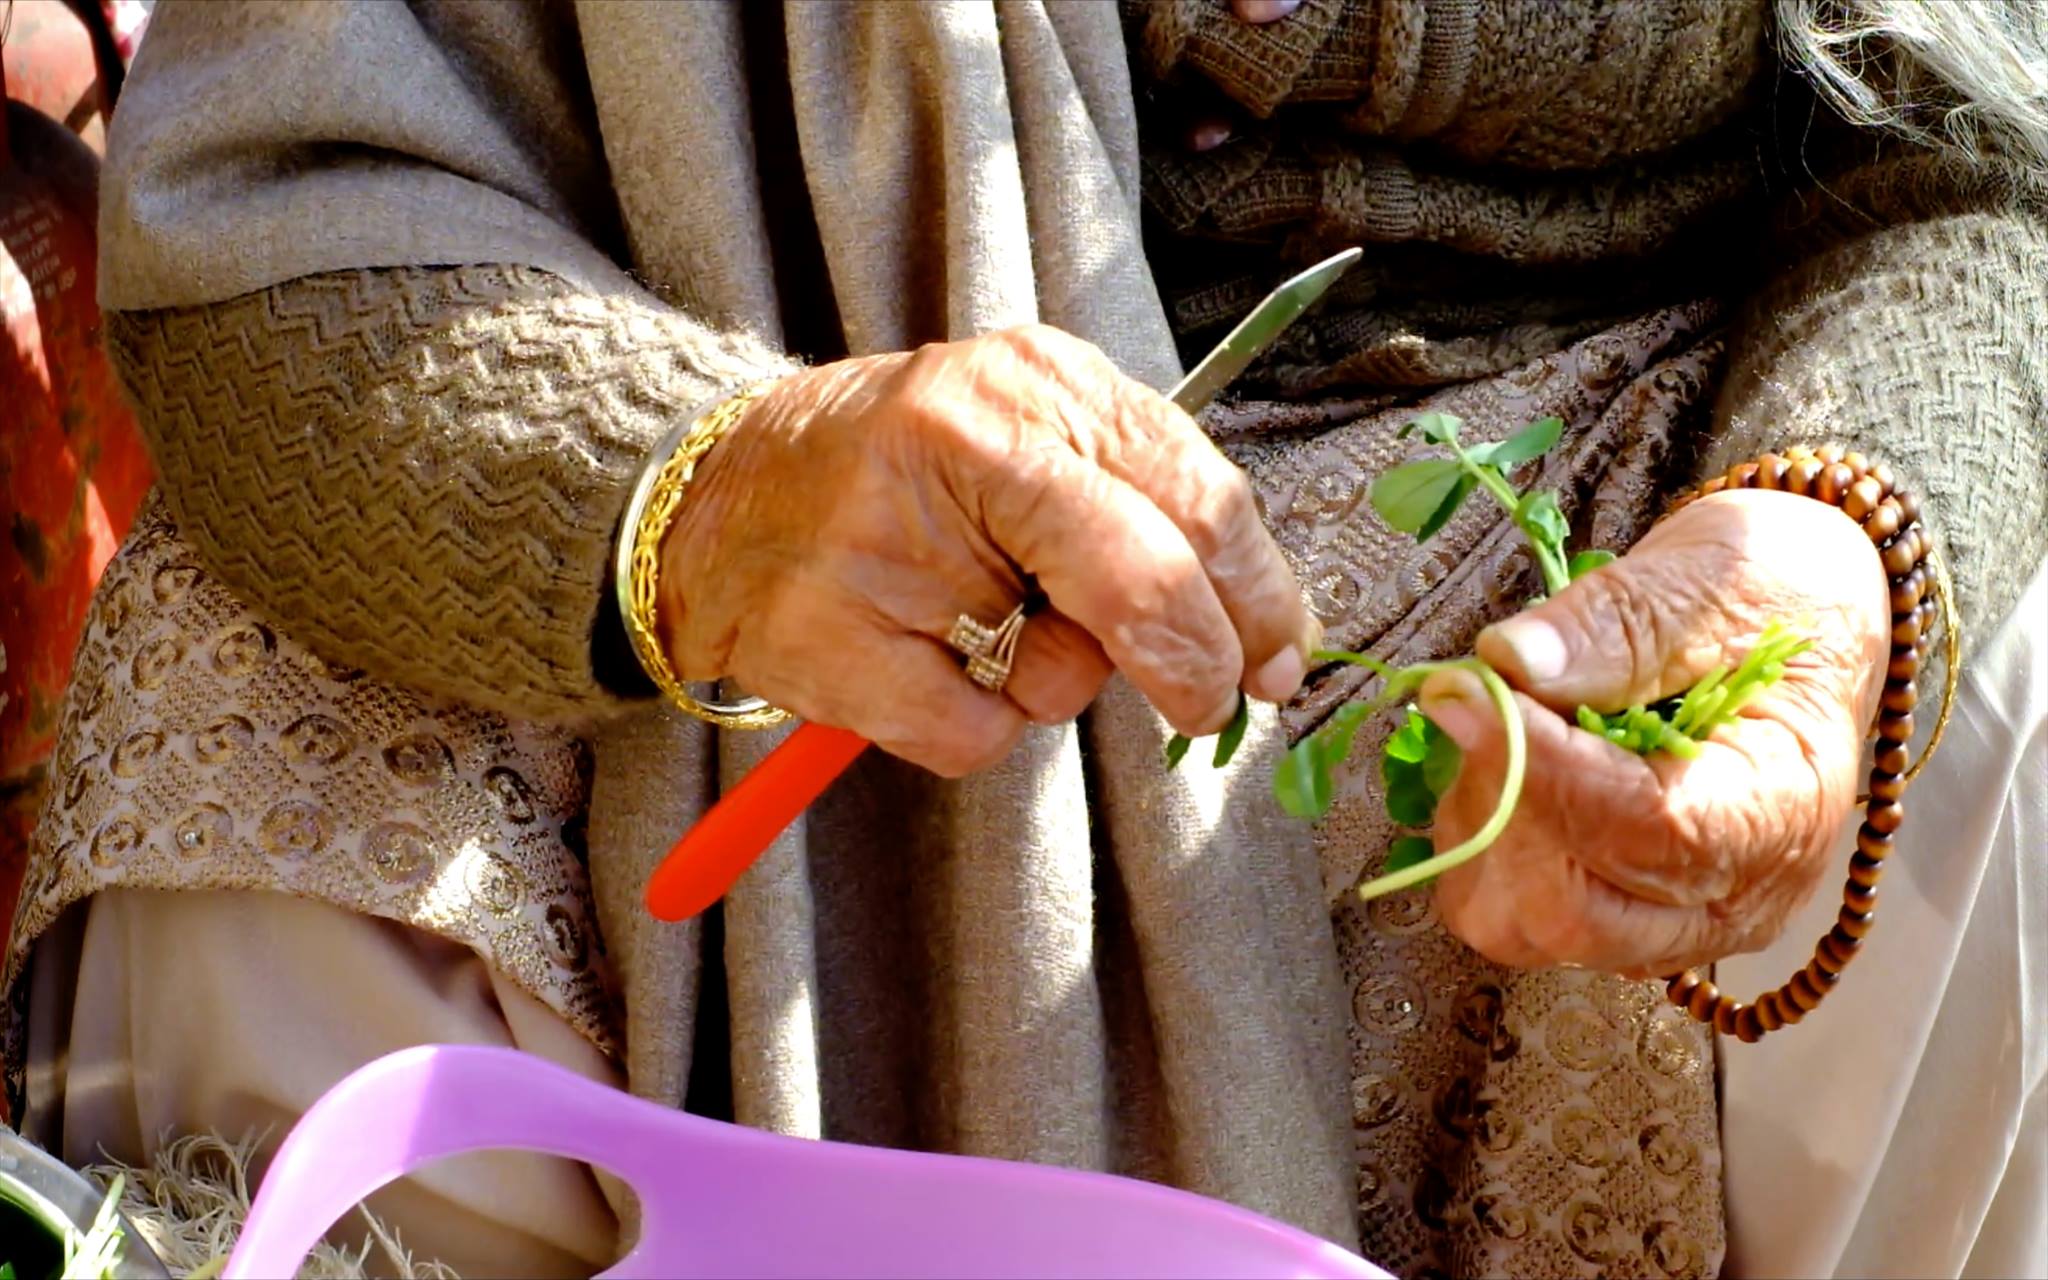 Hands of an old woman dressed warmly, prepping vivid green coriander with a red-handled knife next into a lavender plastic bowl. She is wearing golden and wooden jewellery.